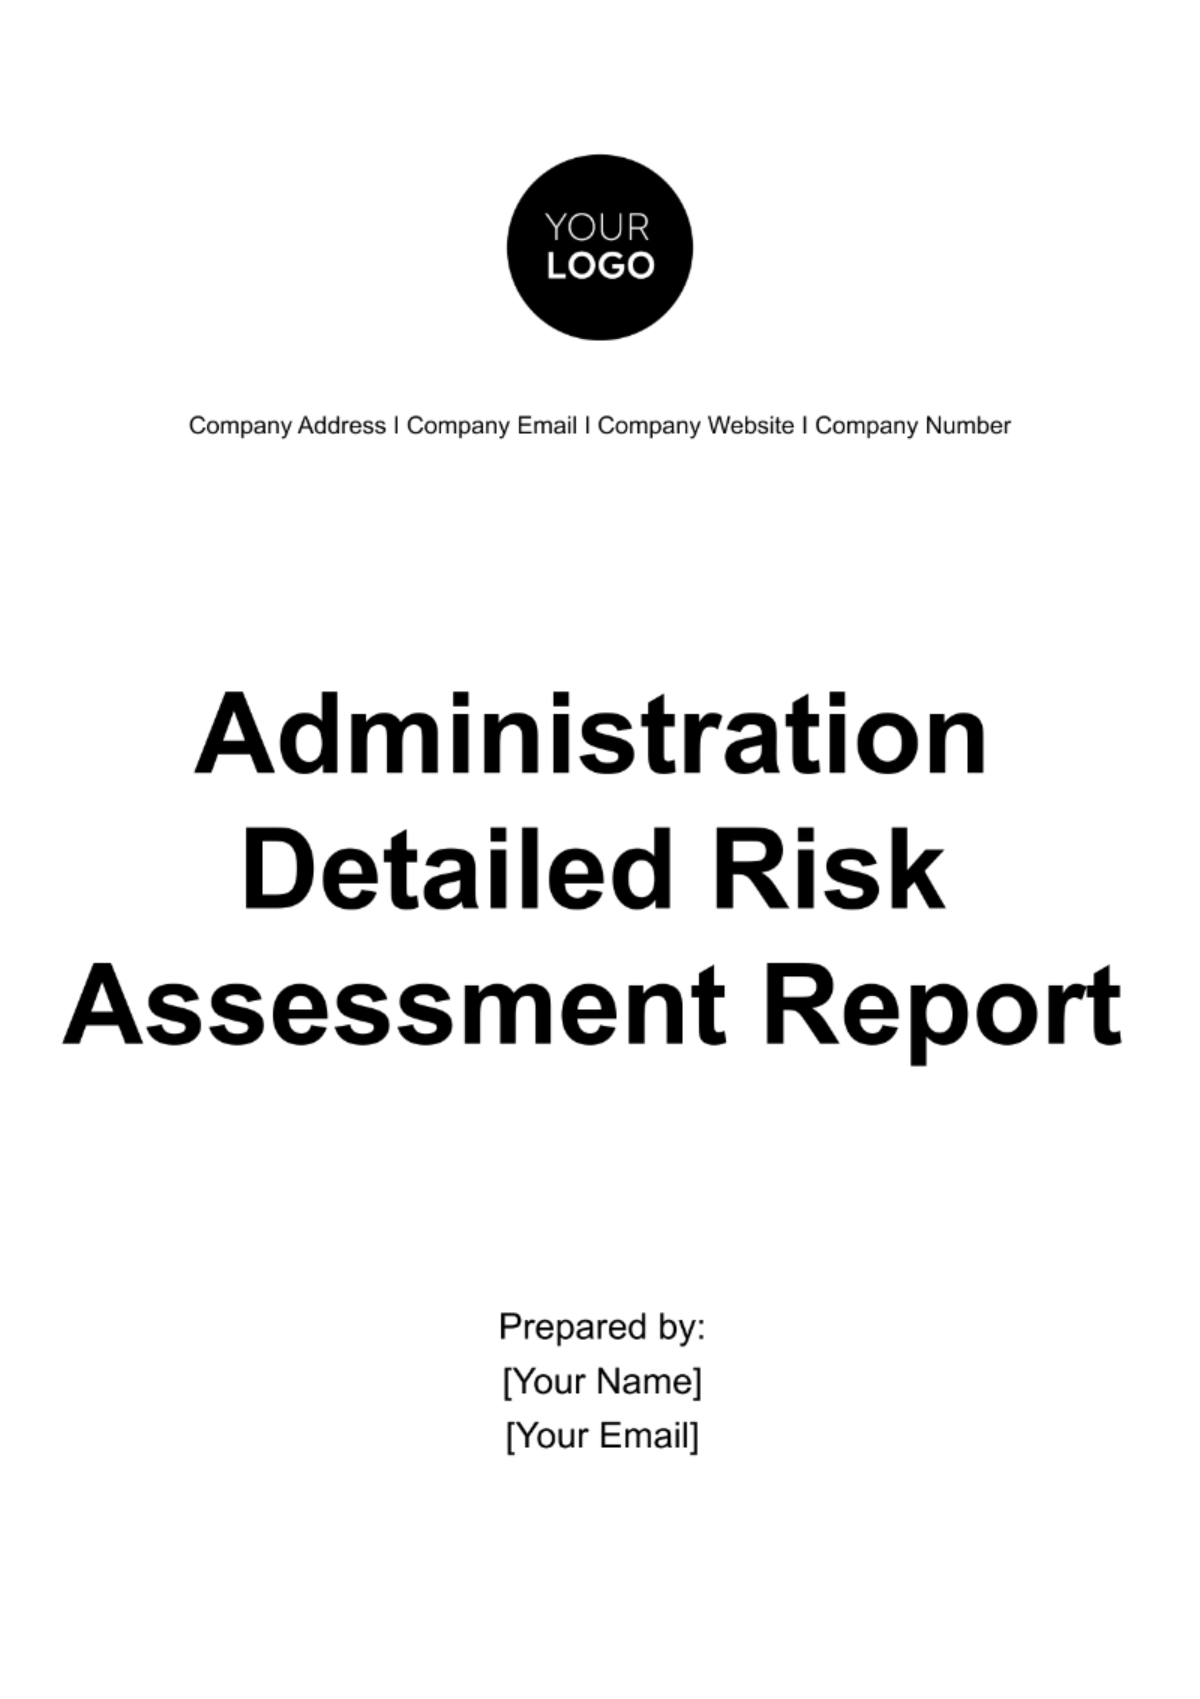 Administration Detailed Risk Assessment Report Template